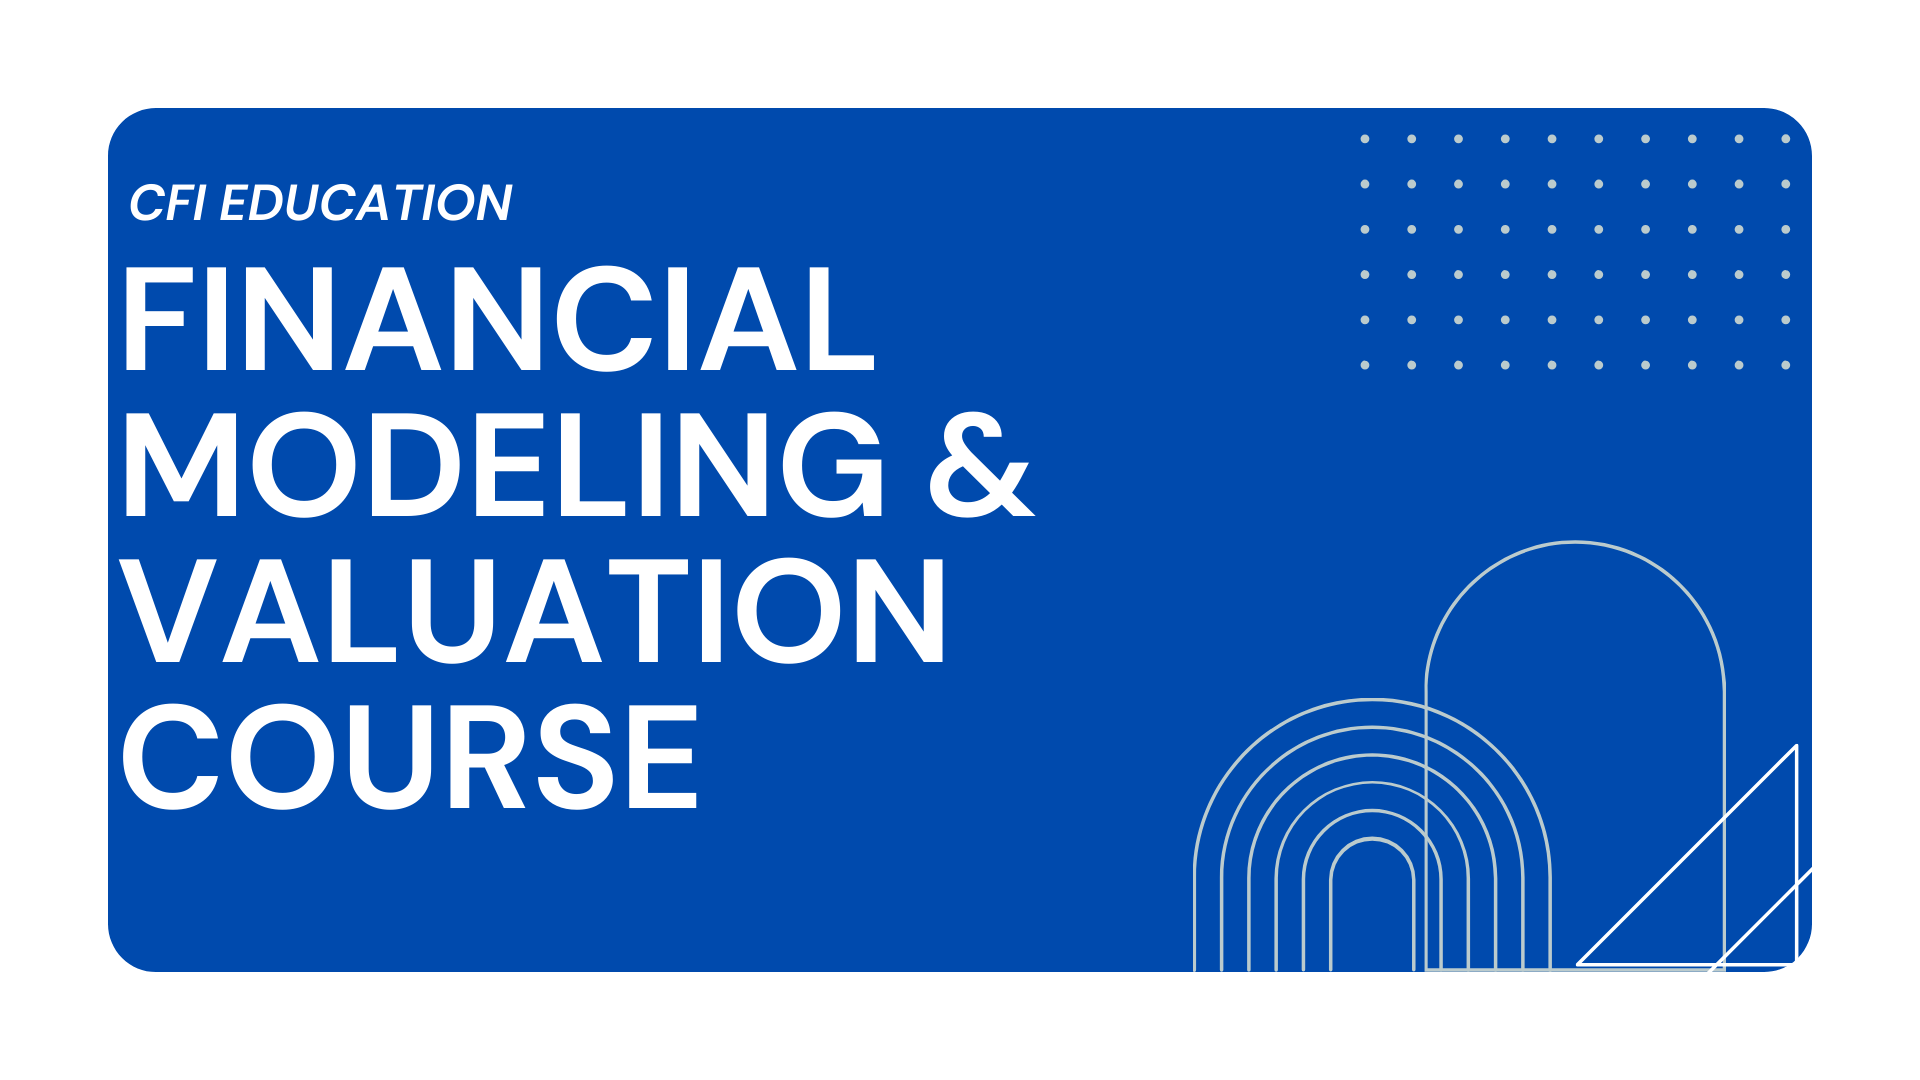 Financial modeling & valuation course